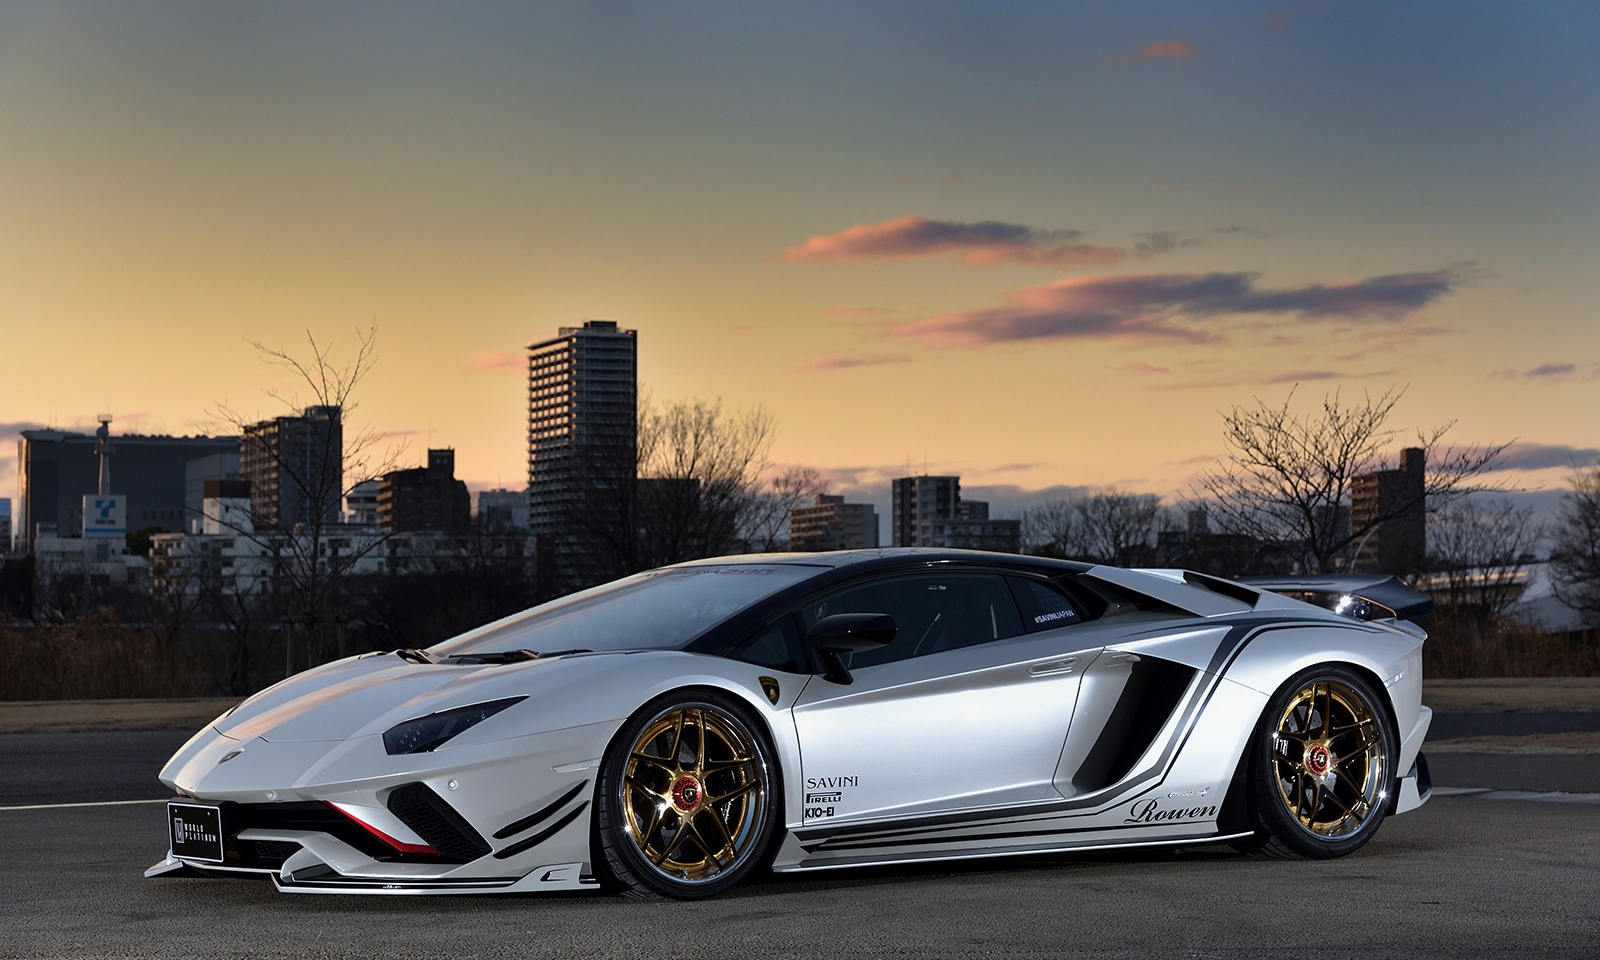 Check our price and buy Rowen body kit for Lamborghini Aventador S